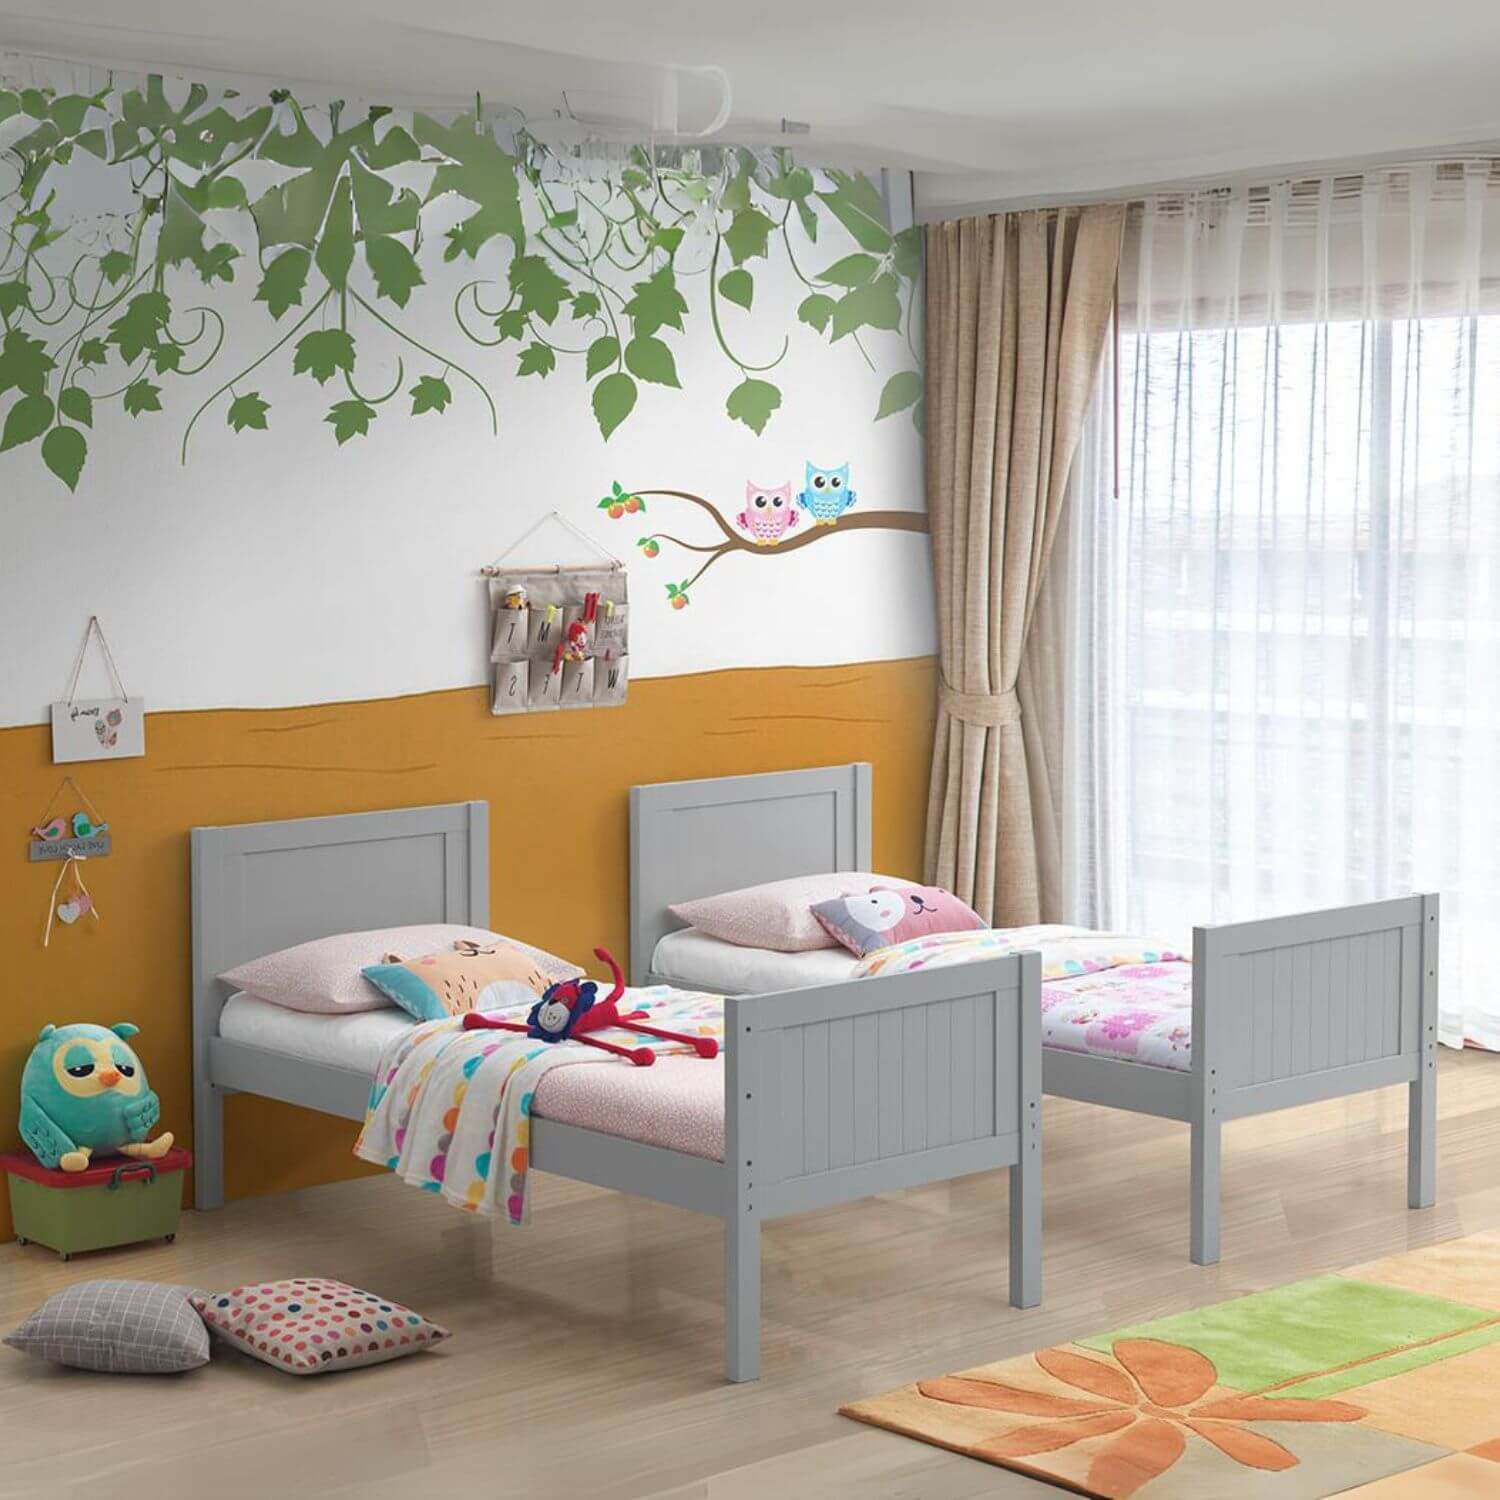 Orbelle Bunk Bed Model 2022 Gray - Lifestyle